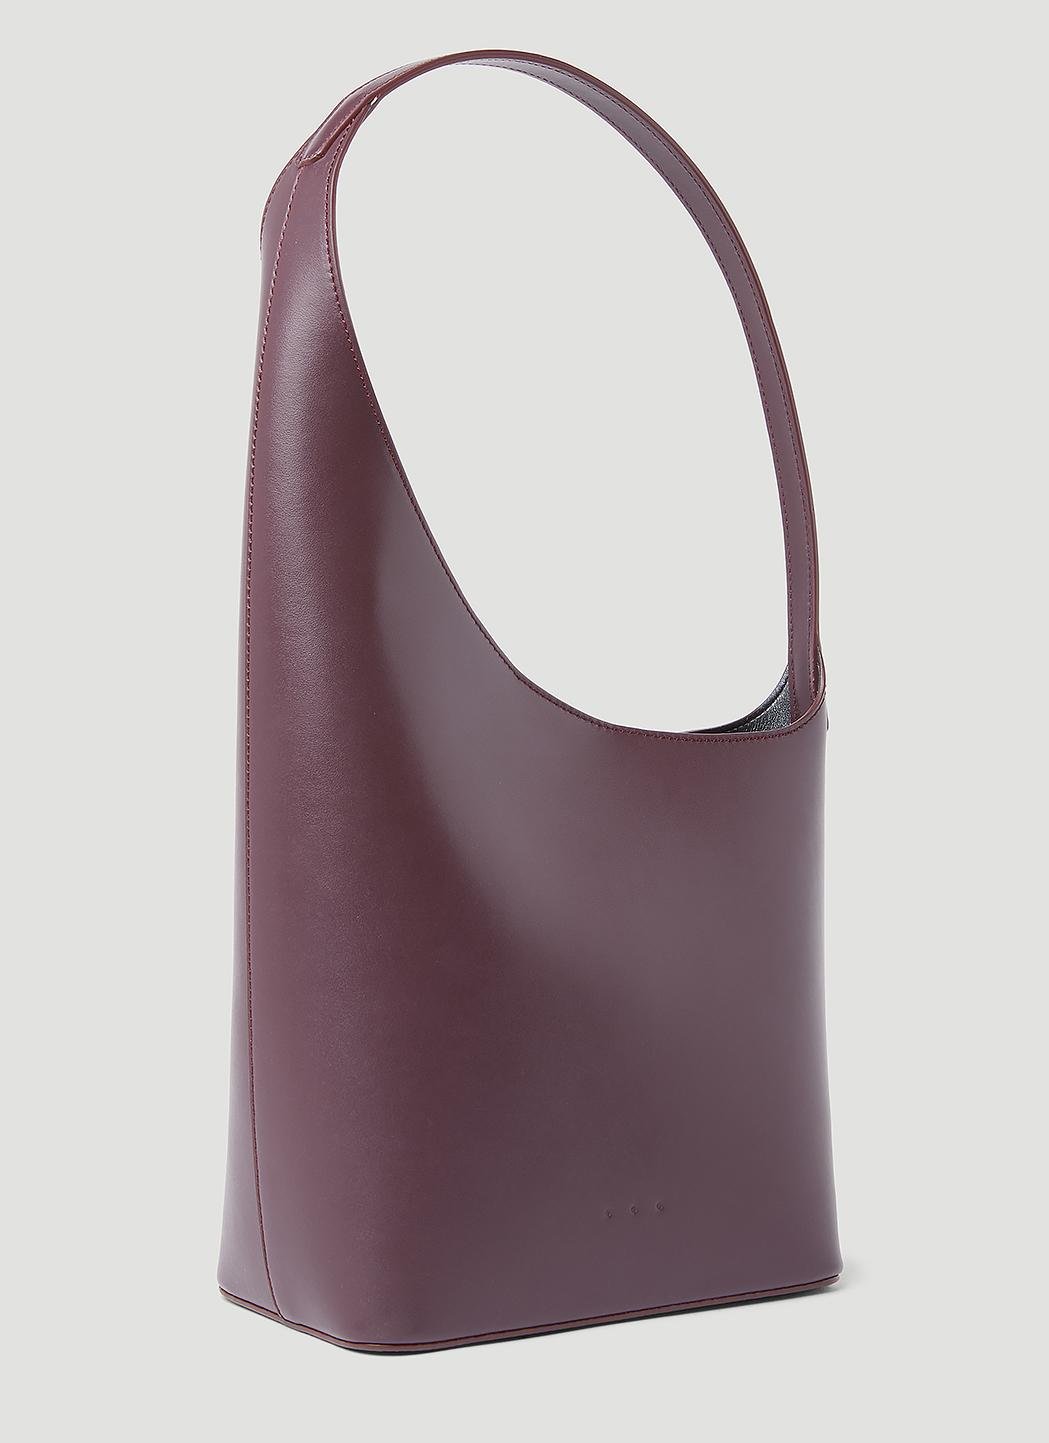 Aesther Ekme New Demi Lune Shoulder Bag in Purple